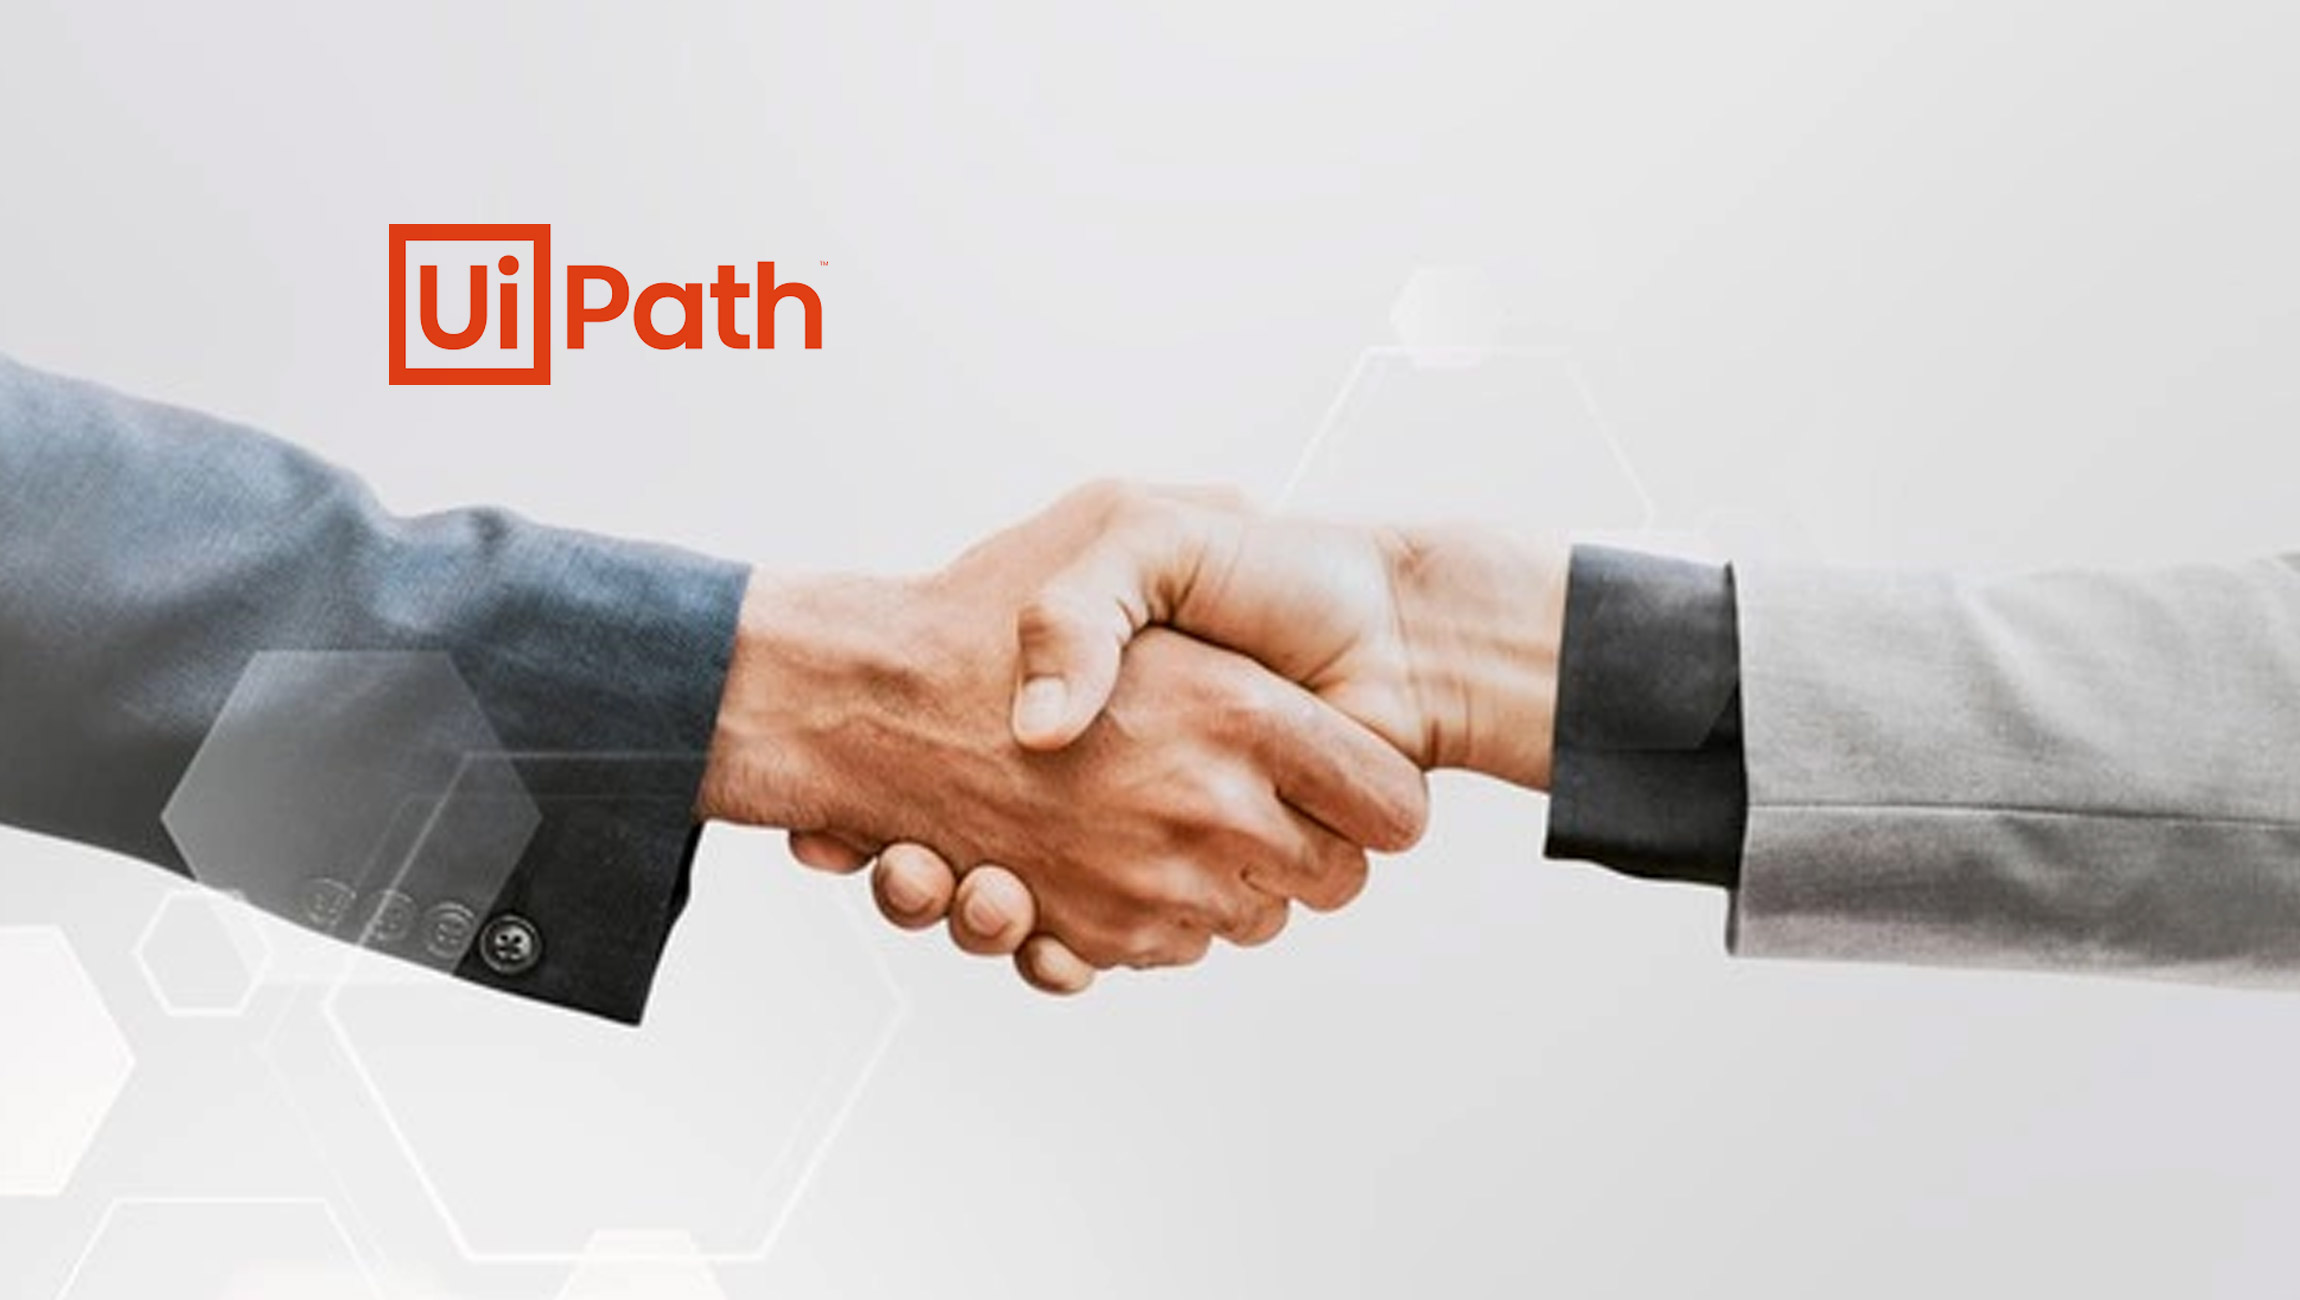 UiPath Announces Managed Services Partnership with Neostella to Deliver Automation for Midmarket Businesses